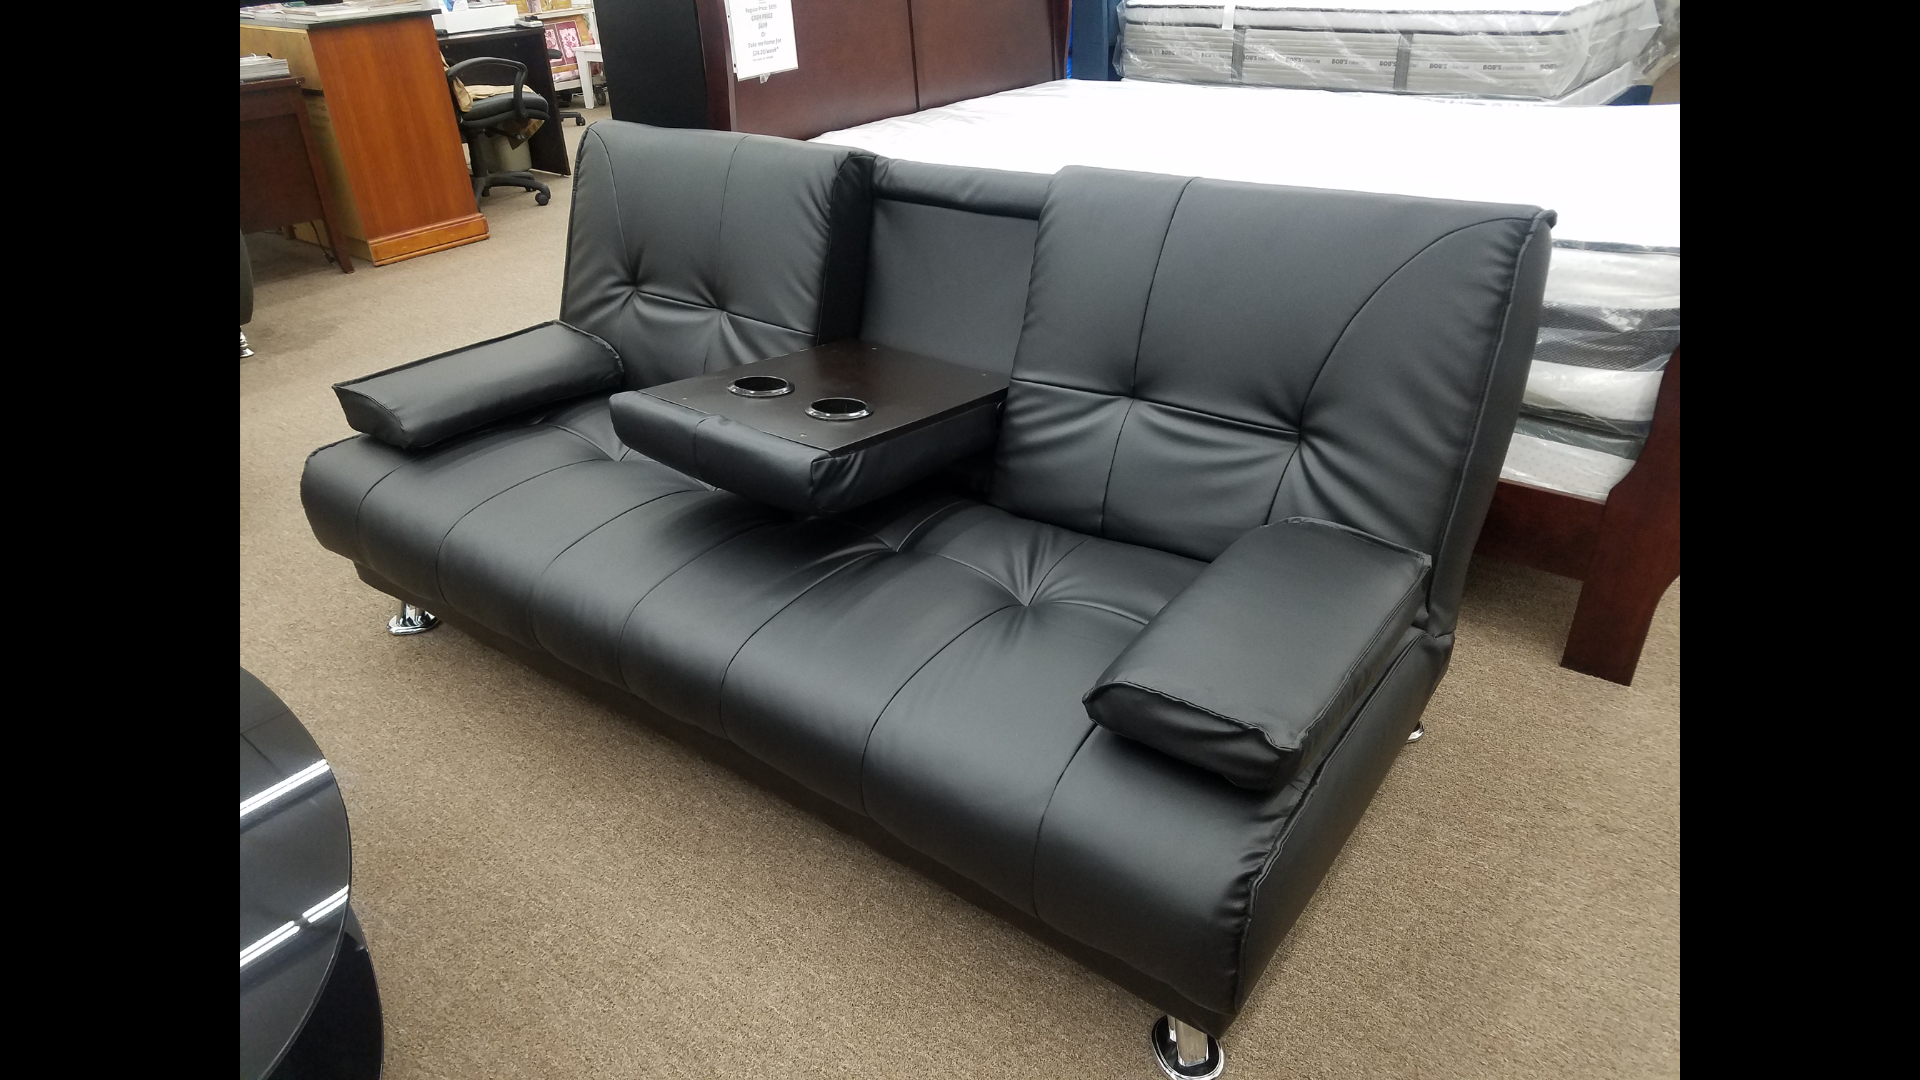 Brand new black color sofa bed with cup holders